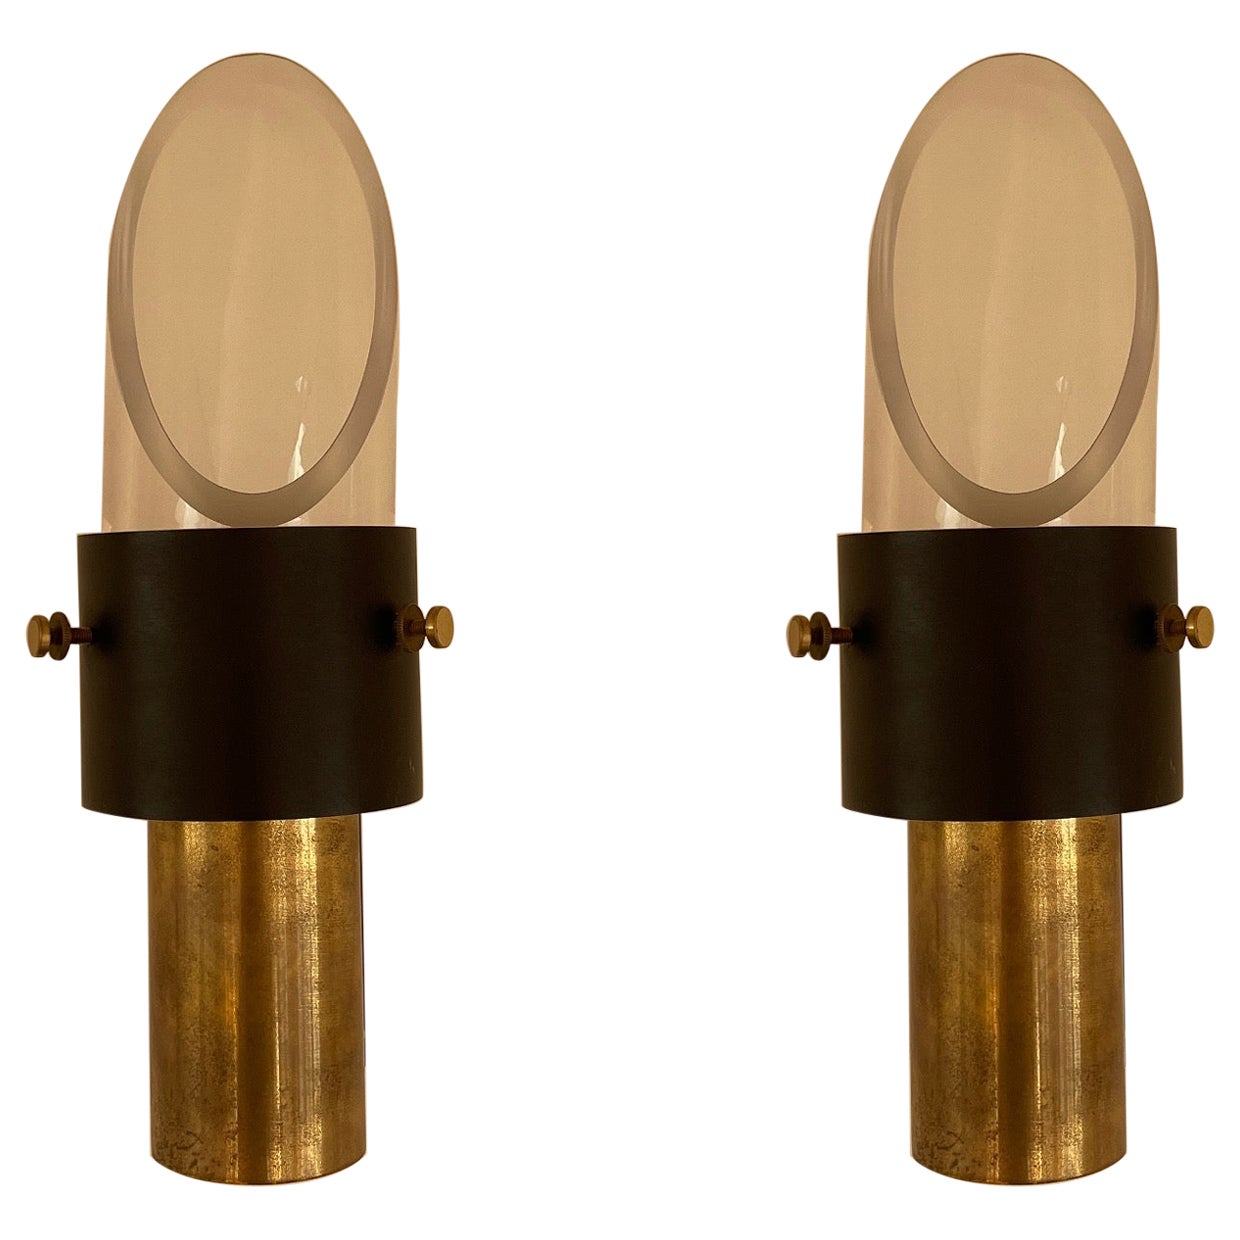 These beautiful wall lights provide slight directional lighting due to the slanted glass shade attached. Beautiful patina evident on the solid brass hardware. An incredibly striking lighting solution.